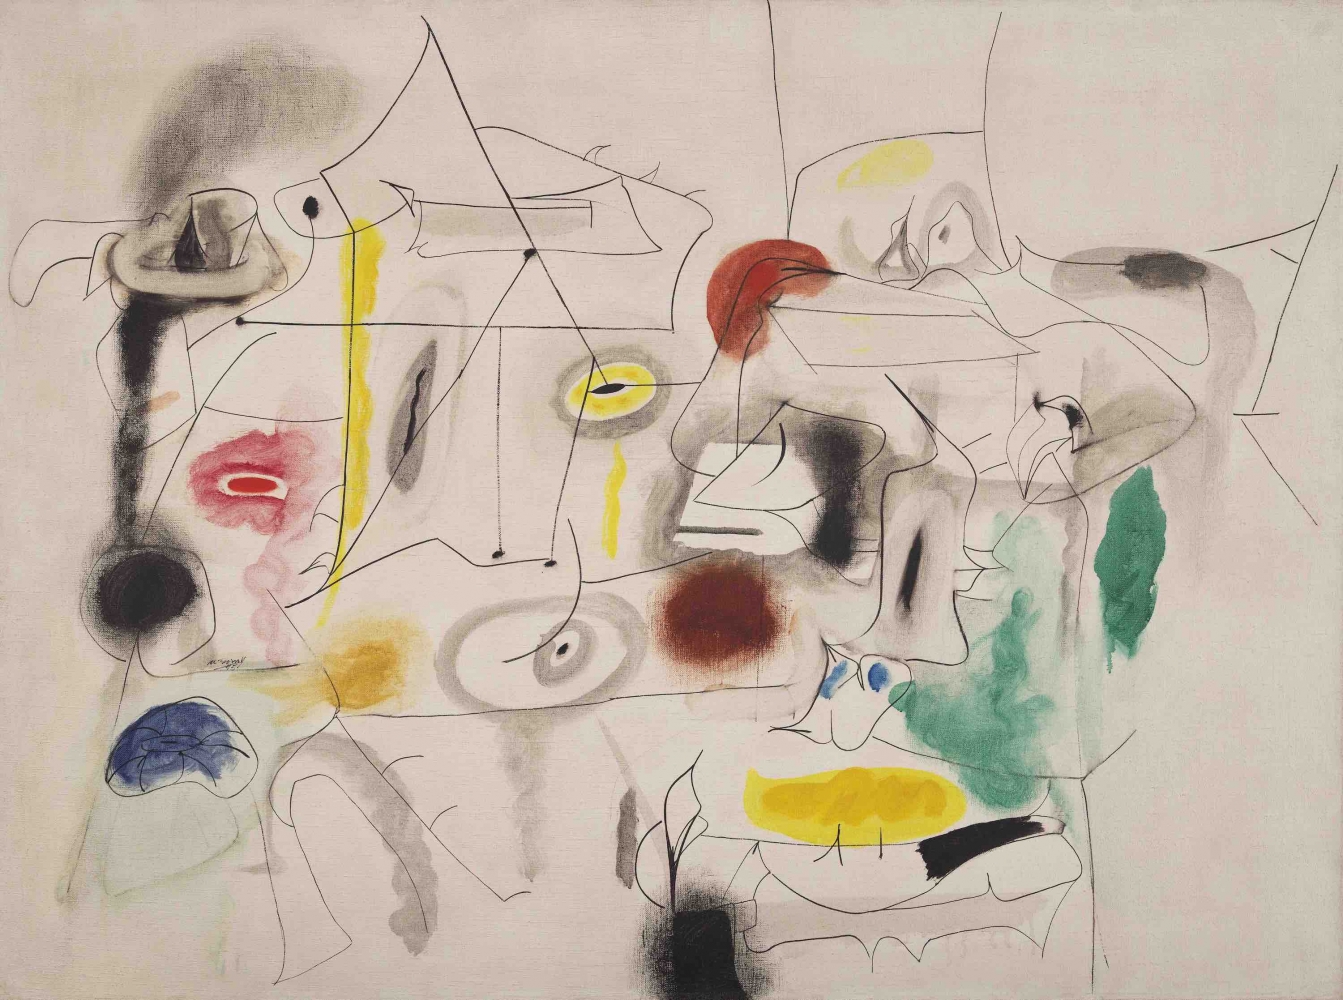 Child's Companion, a 1945 painting by Arshile Gorky.